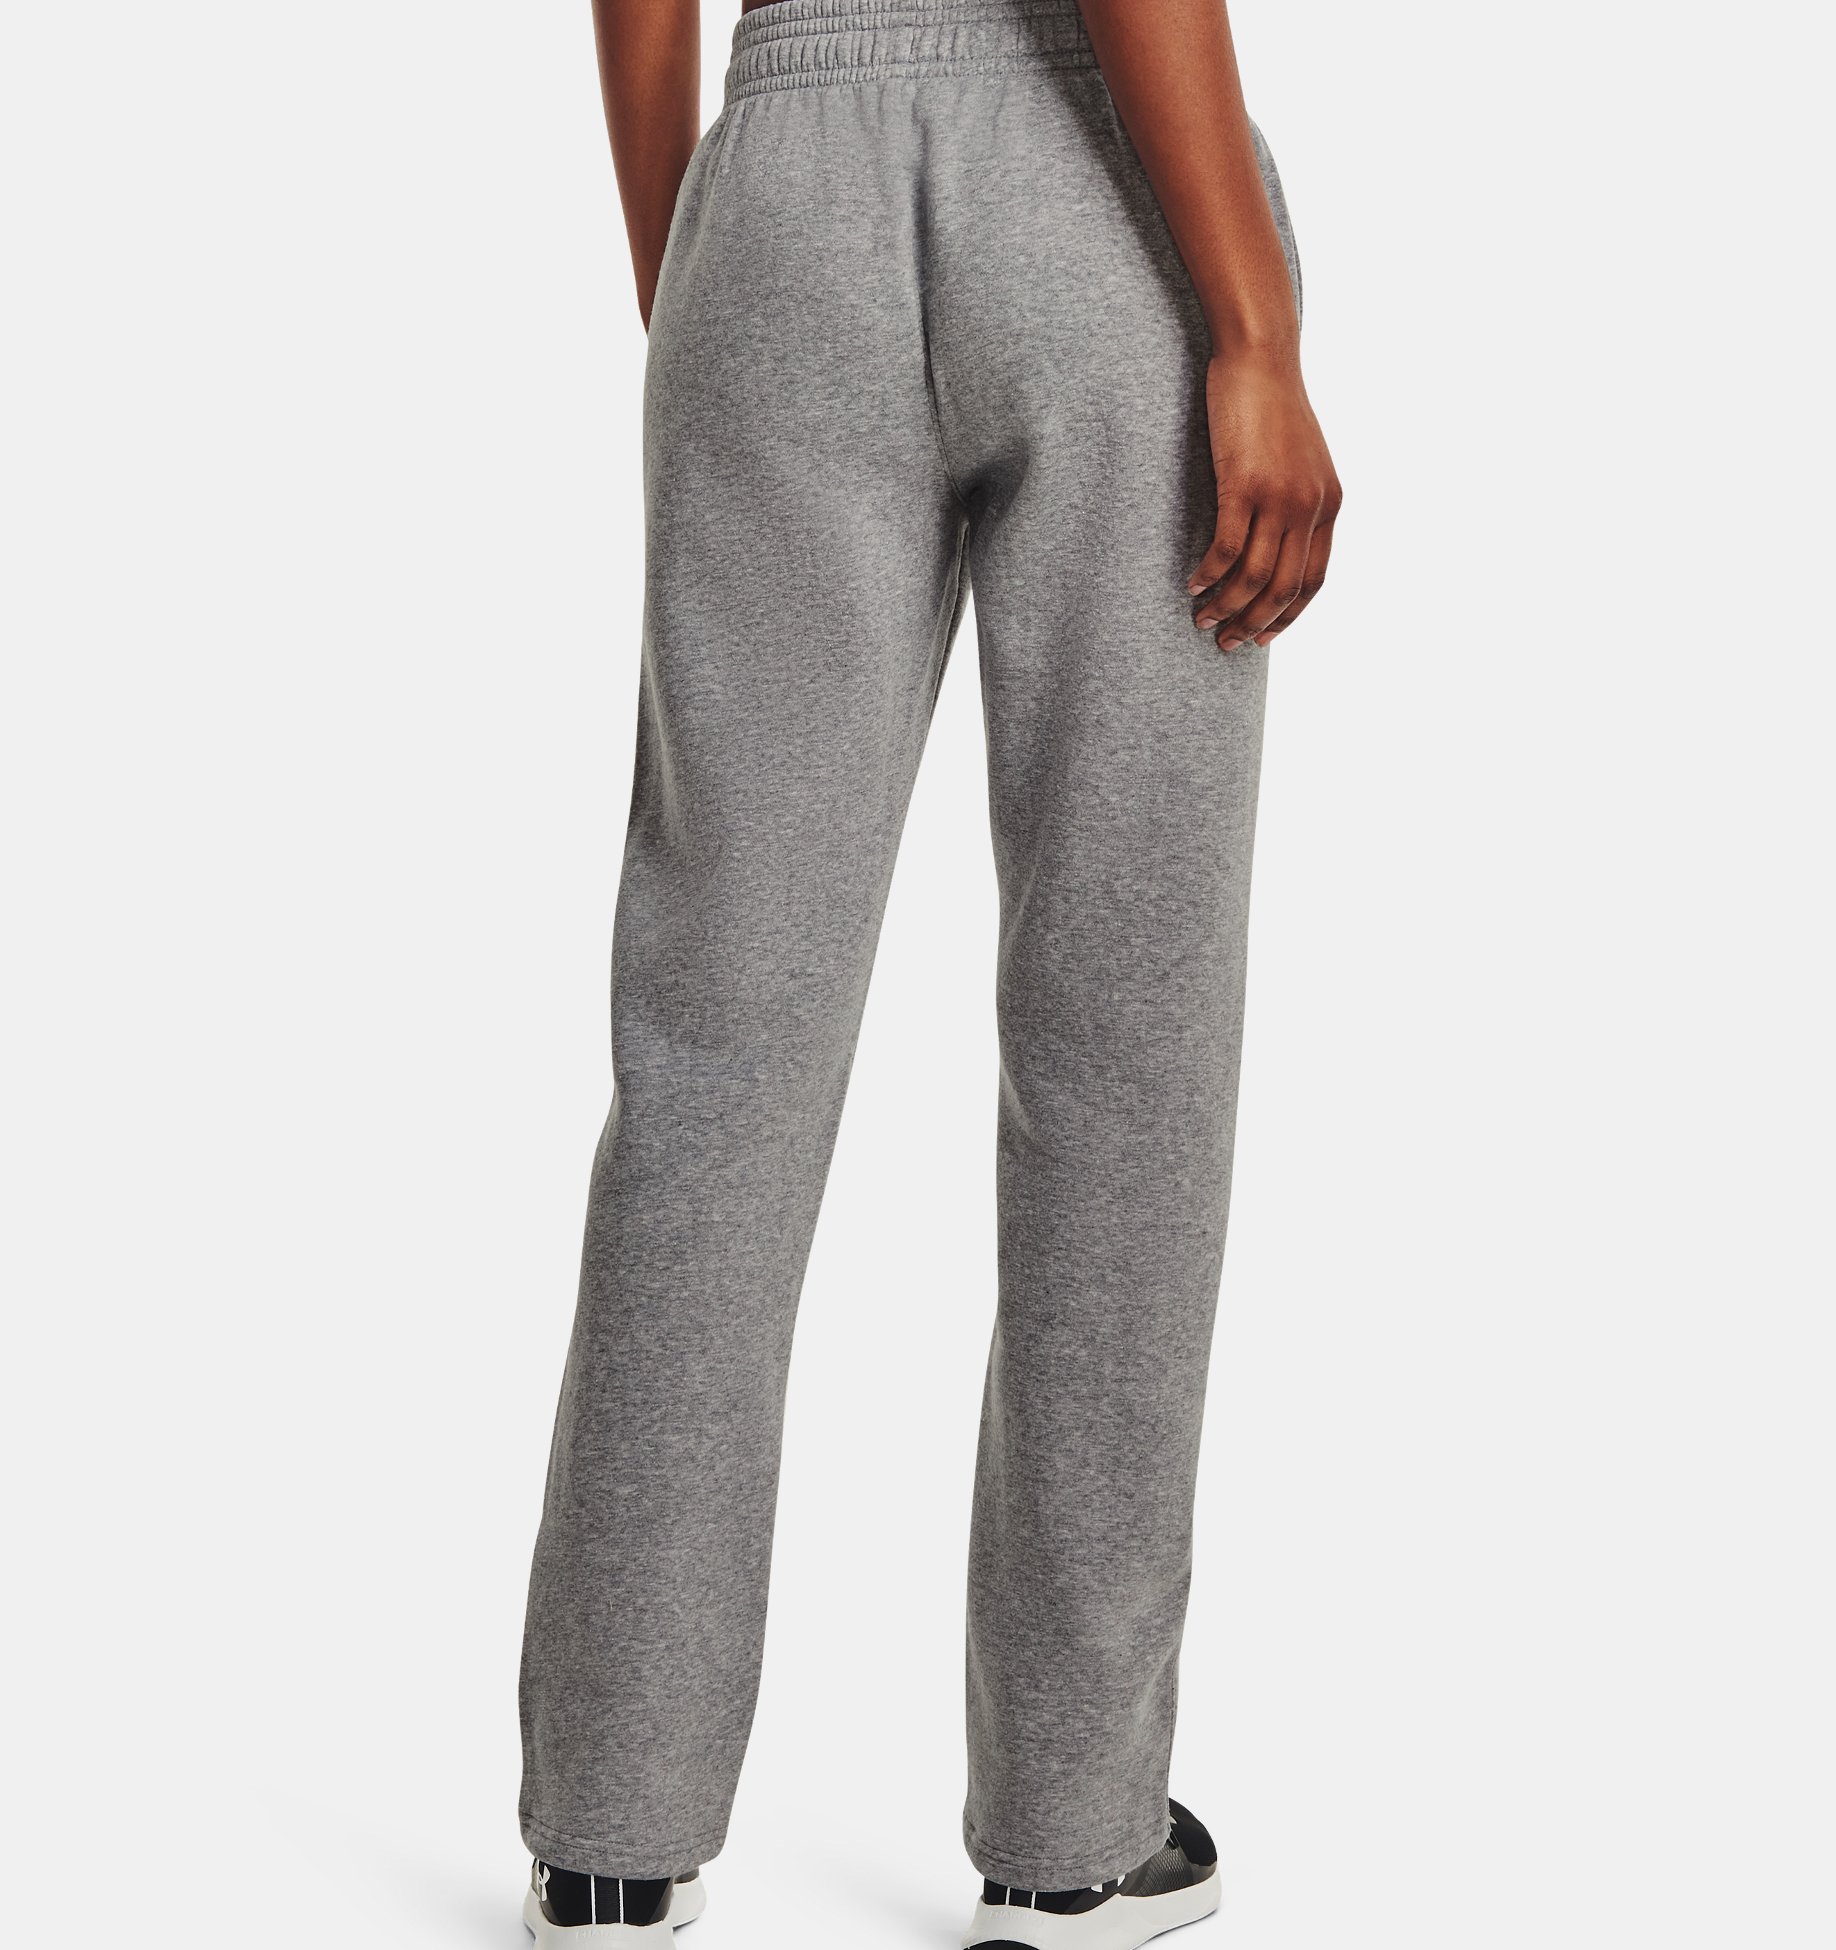 Under Armour Divvy Pant Womens